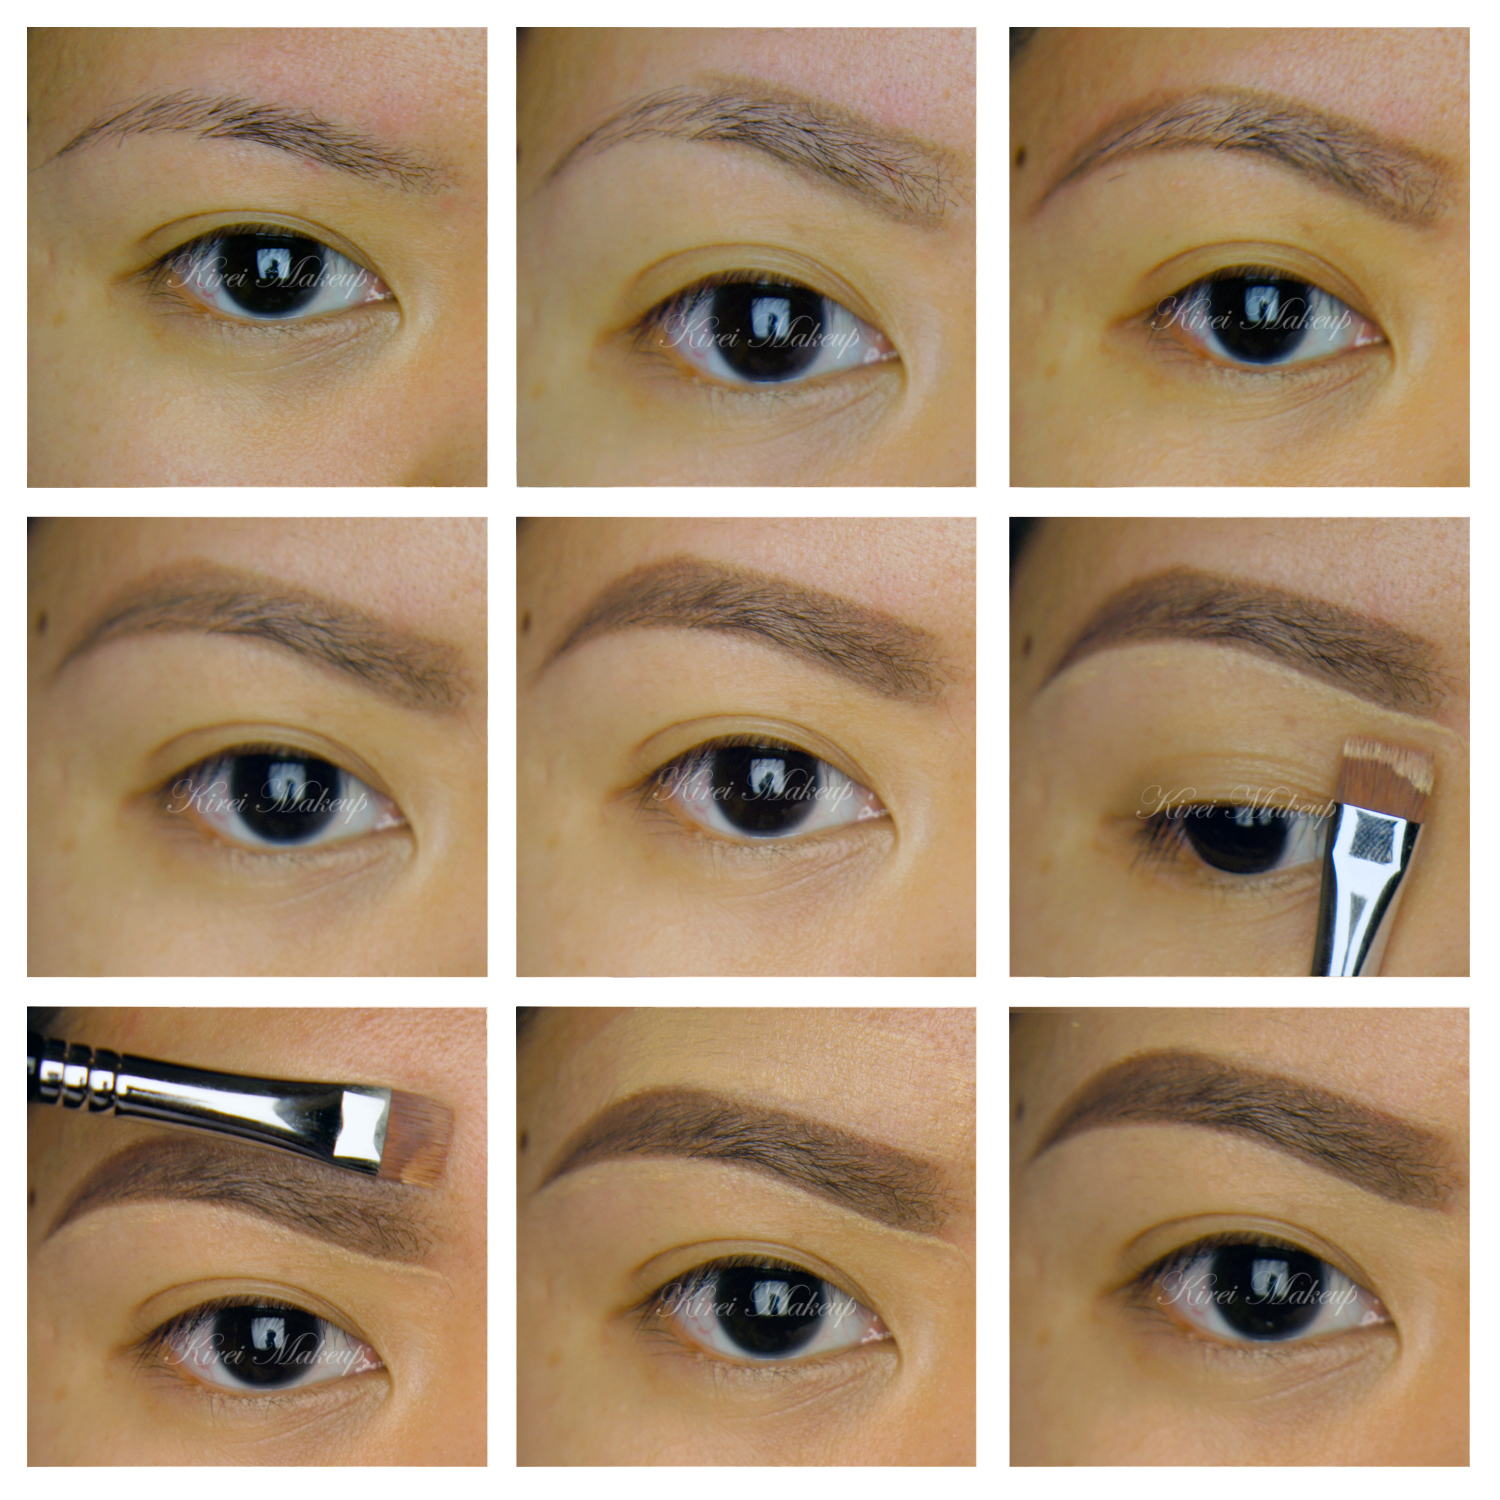 How to Fill in Eyebrows - Kirei Makeup